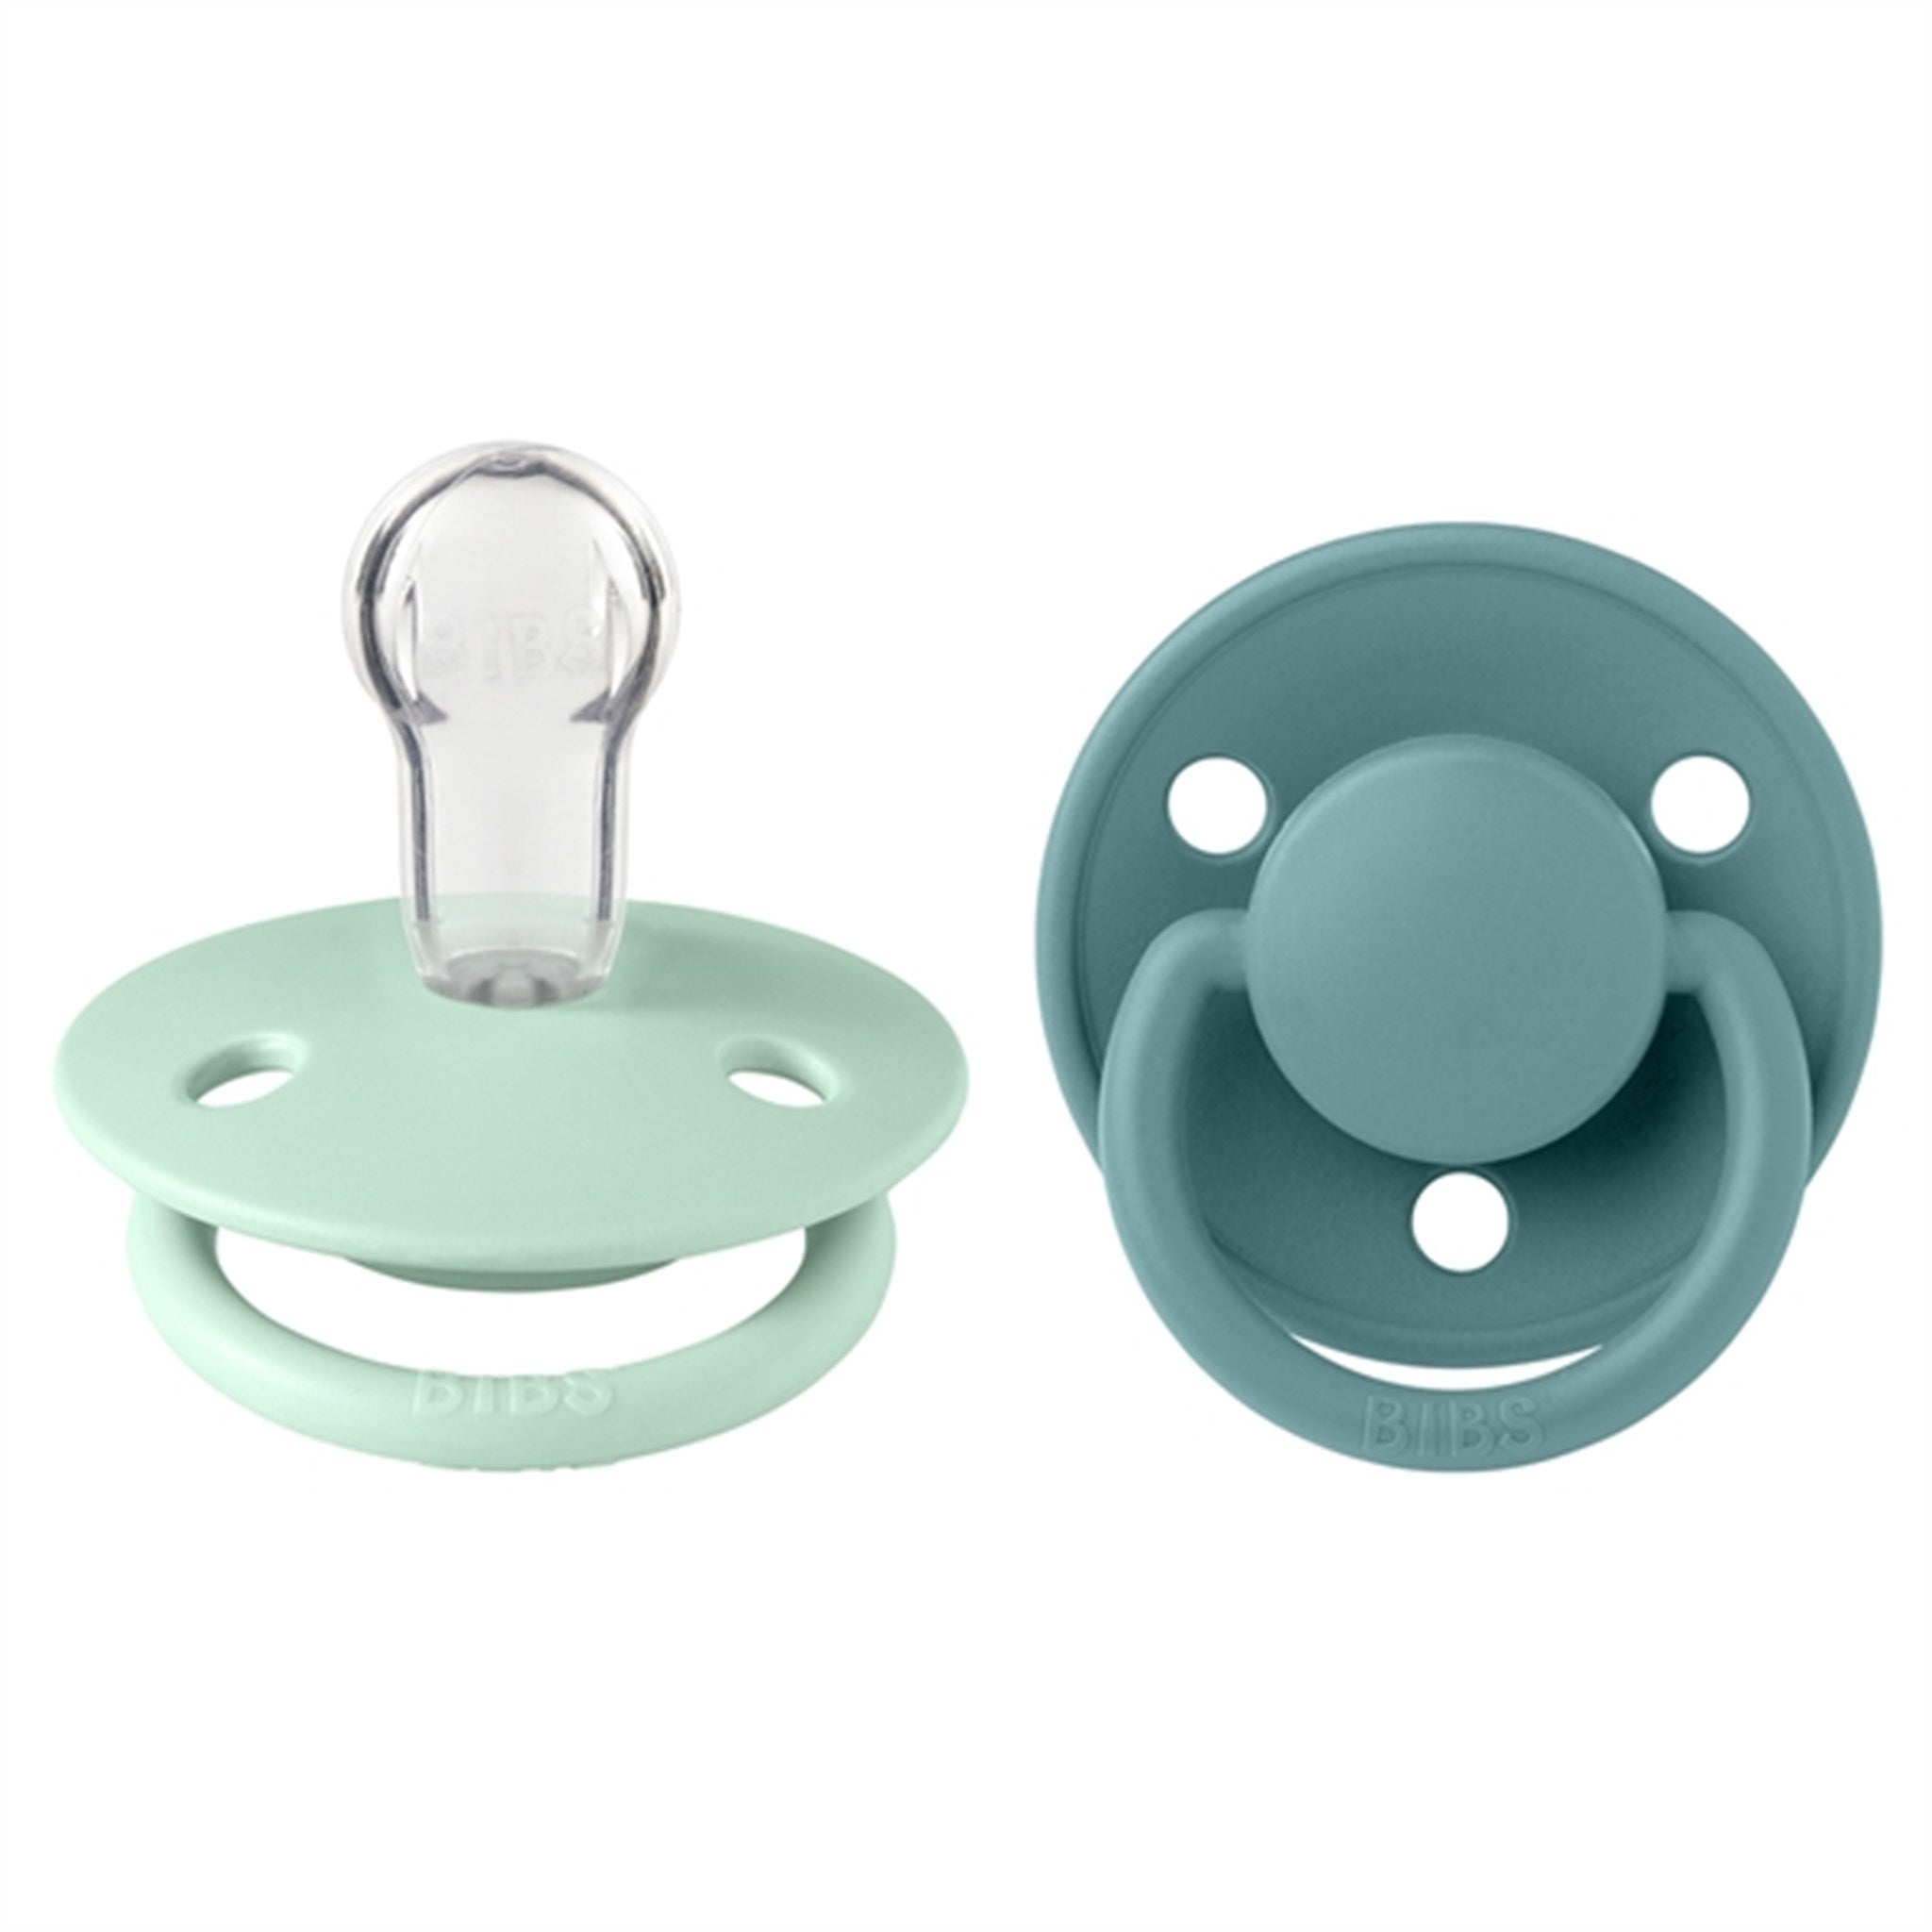 Bibs De Lux Silicone Pacifiers 2-pack Round Mint/Island Sea